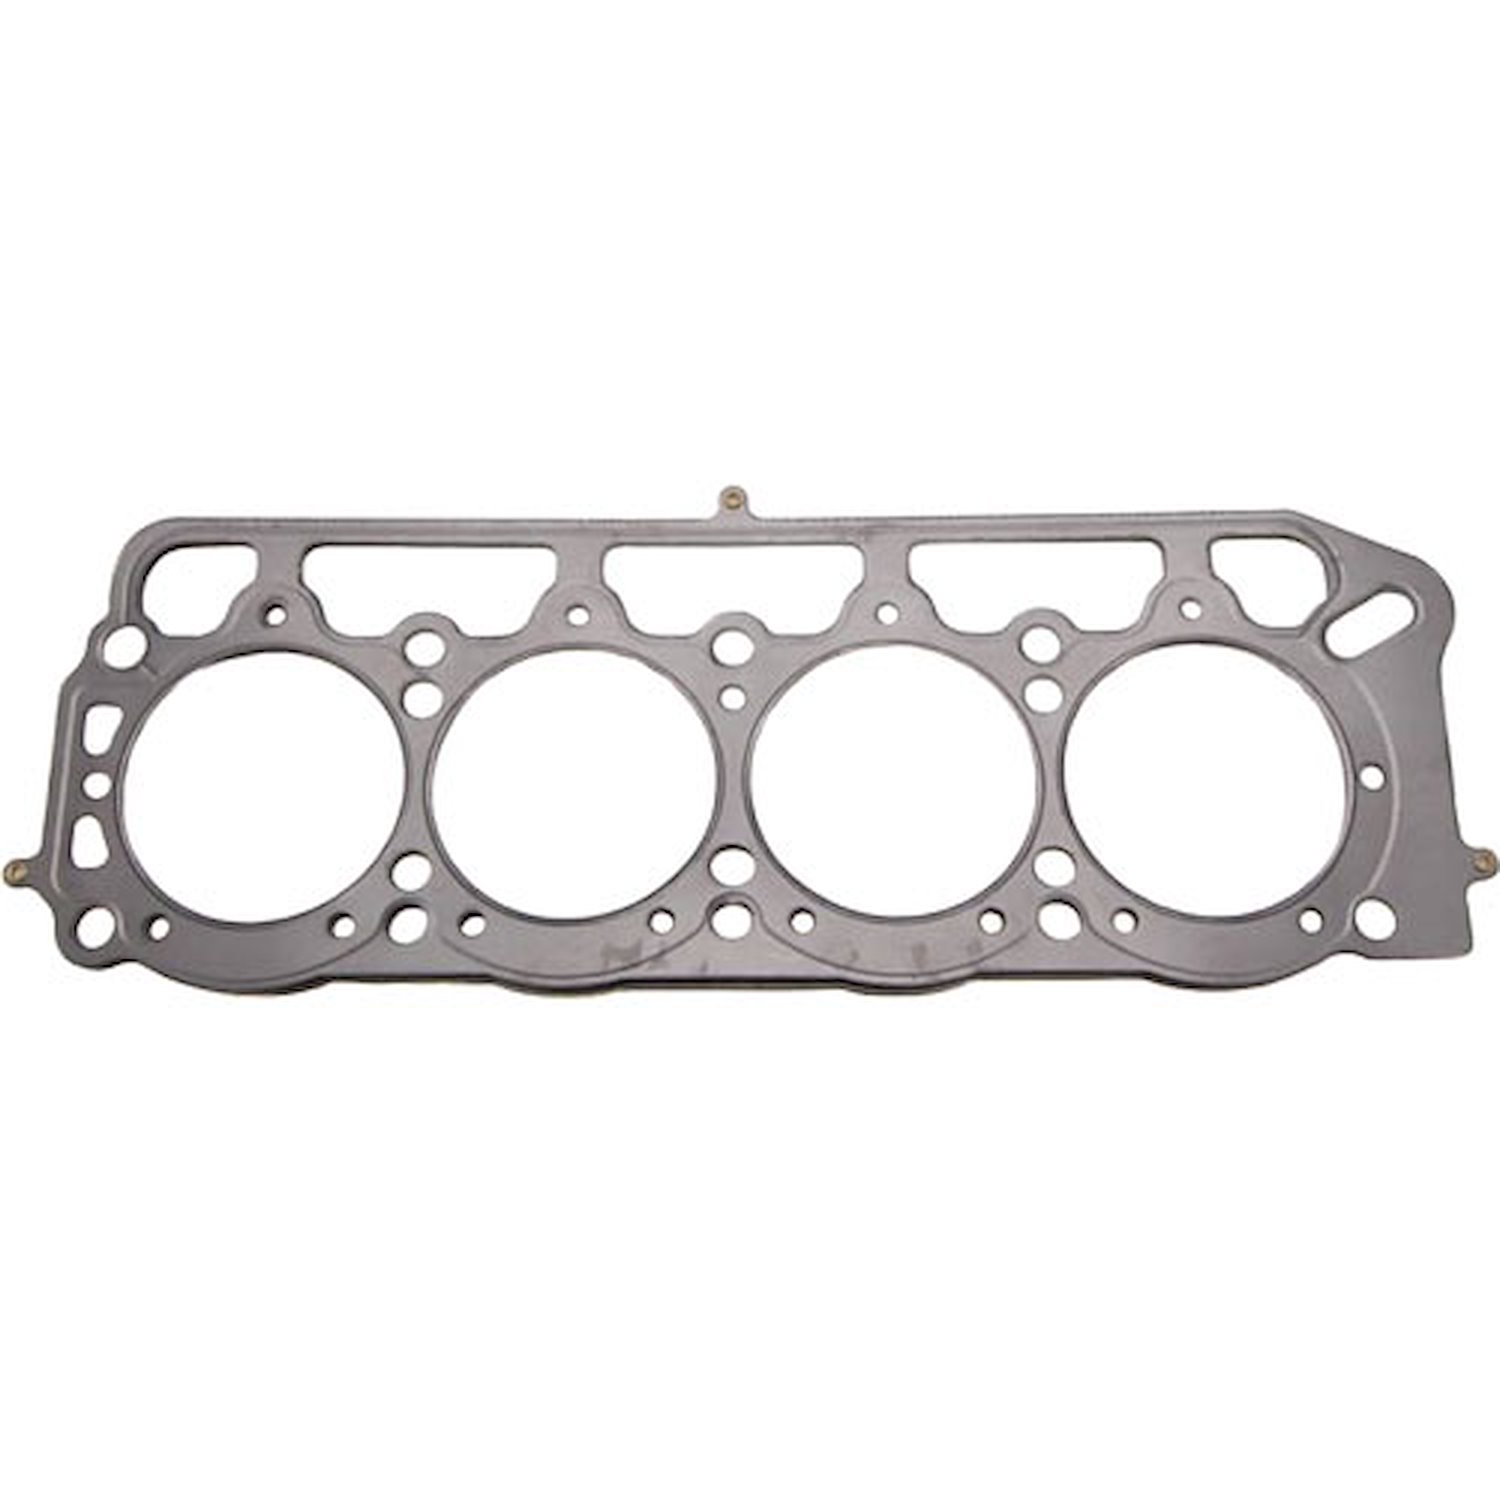 Head Gasket for Select 1971-1982 Toyota Carina/Corolla with 2T, 2T-C, 3T-C, 3T-EU, 13T-U Engines [0.060 in.]